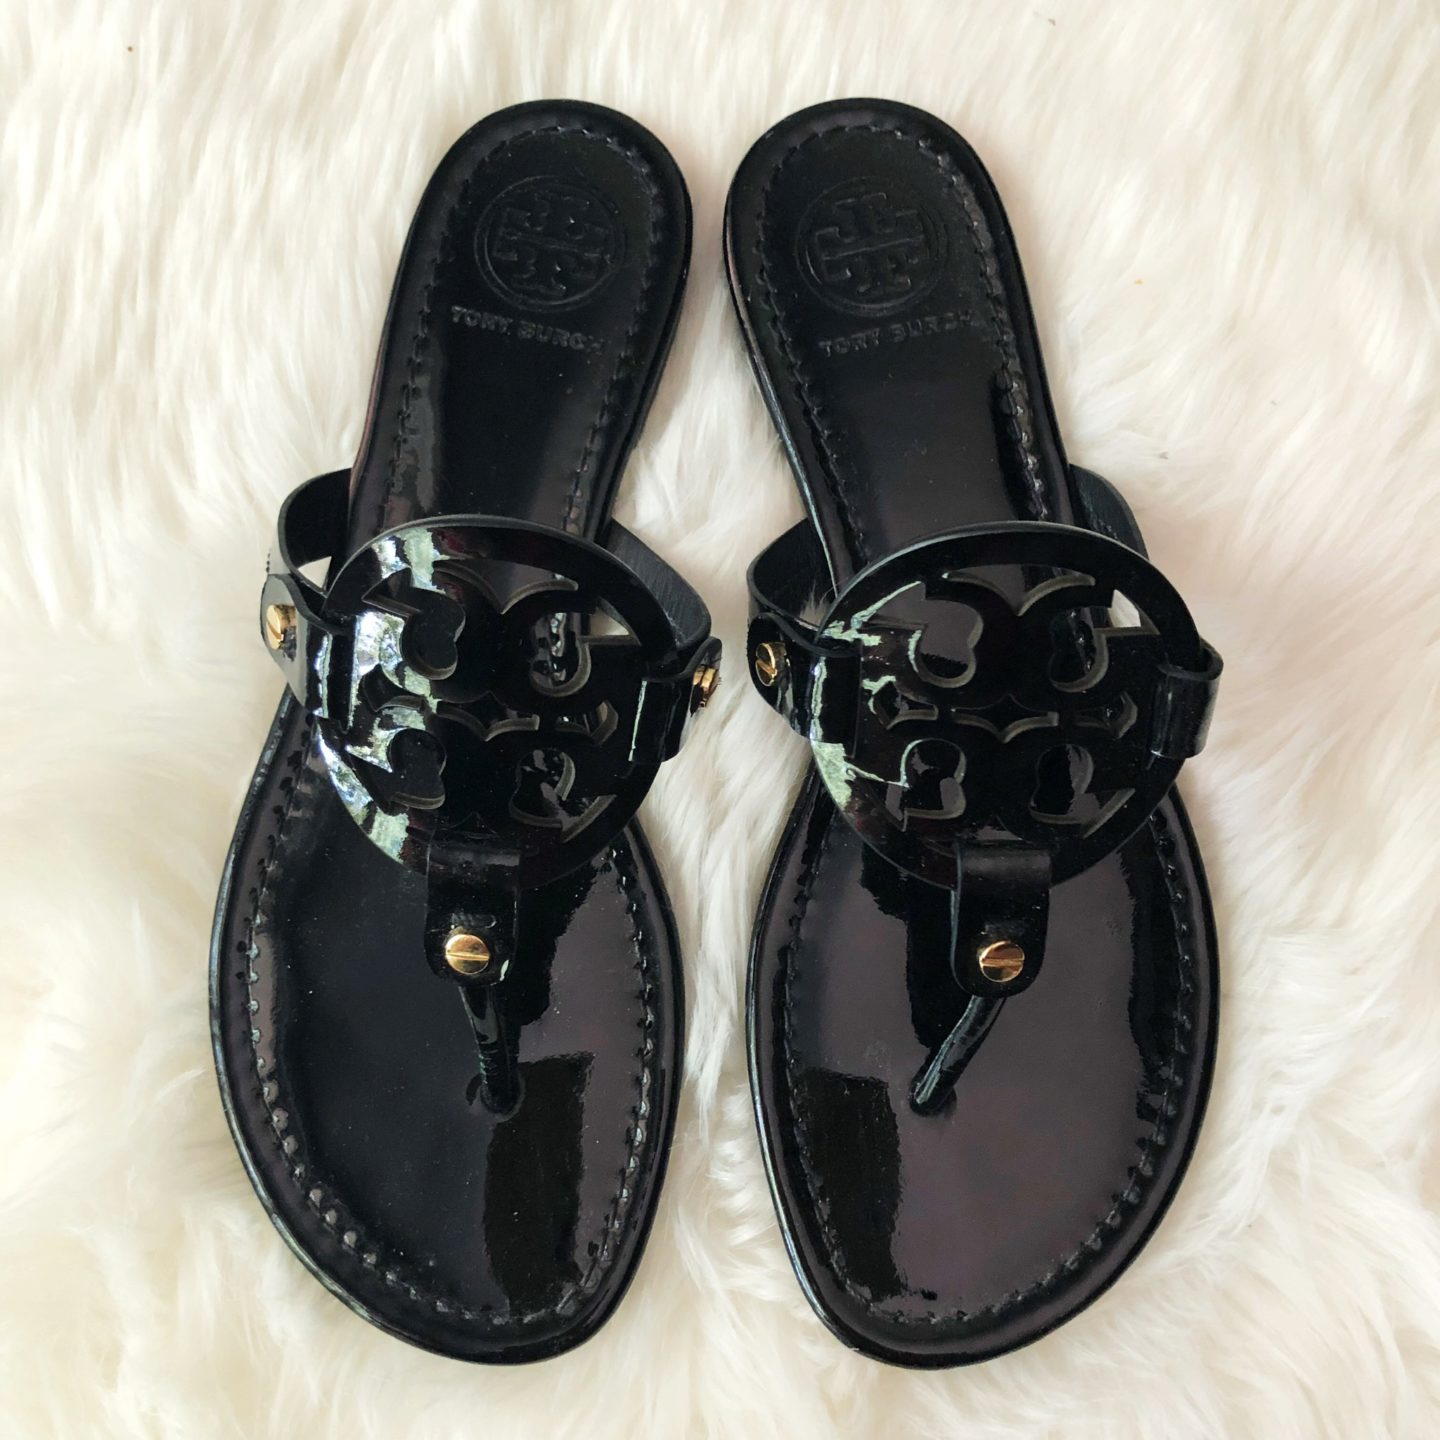 Our Favorite Tory Burch Sandal Colors & Styles + Giftcard Promo! - The ...